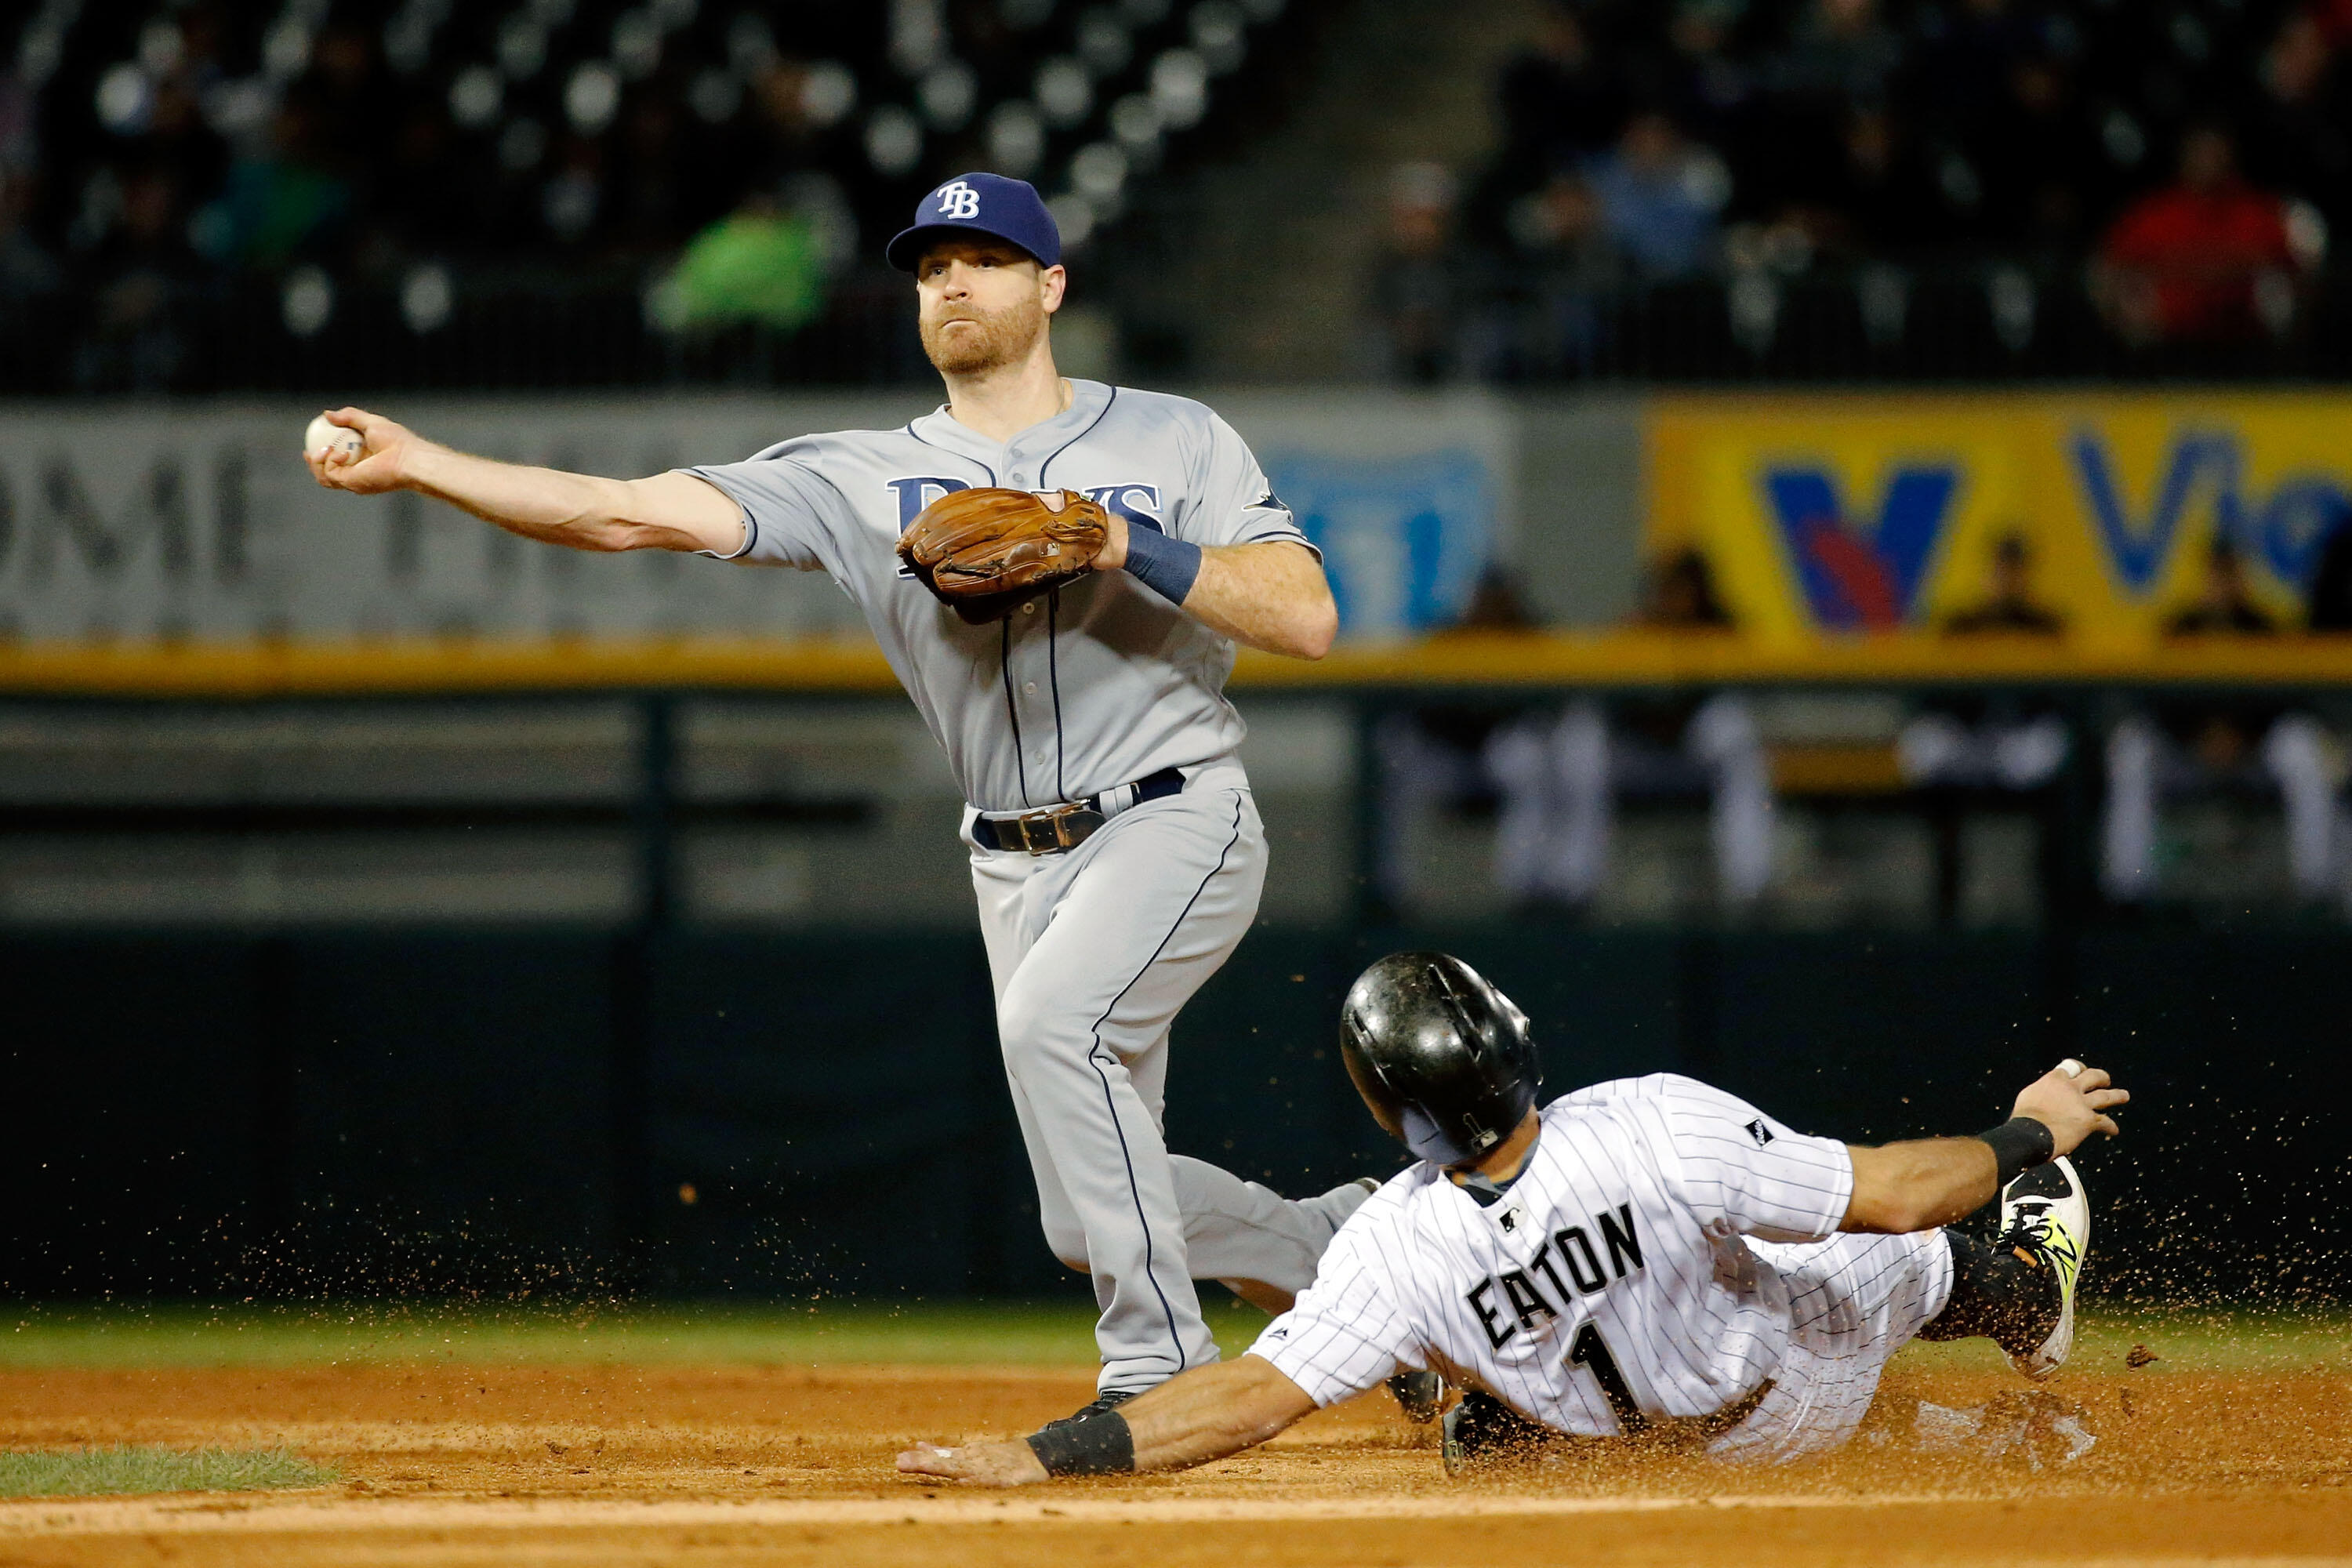 CHICAGO, IL - SEPTEMBER 29: Logan Forsythe #11 of the Tampa Bay Rays throws to first base to complete a double play after forcing out Adam Eaton #1 of the Chicago White Sox during the third inning at U.S. Cellular Field on September 29, 2016 in Chicago, I